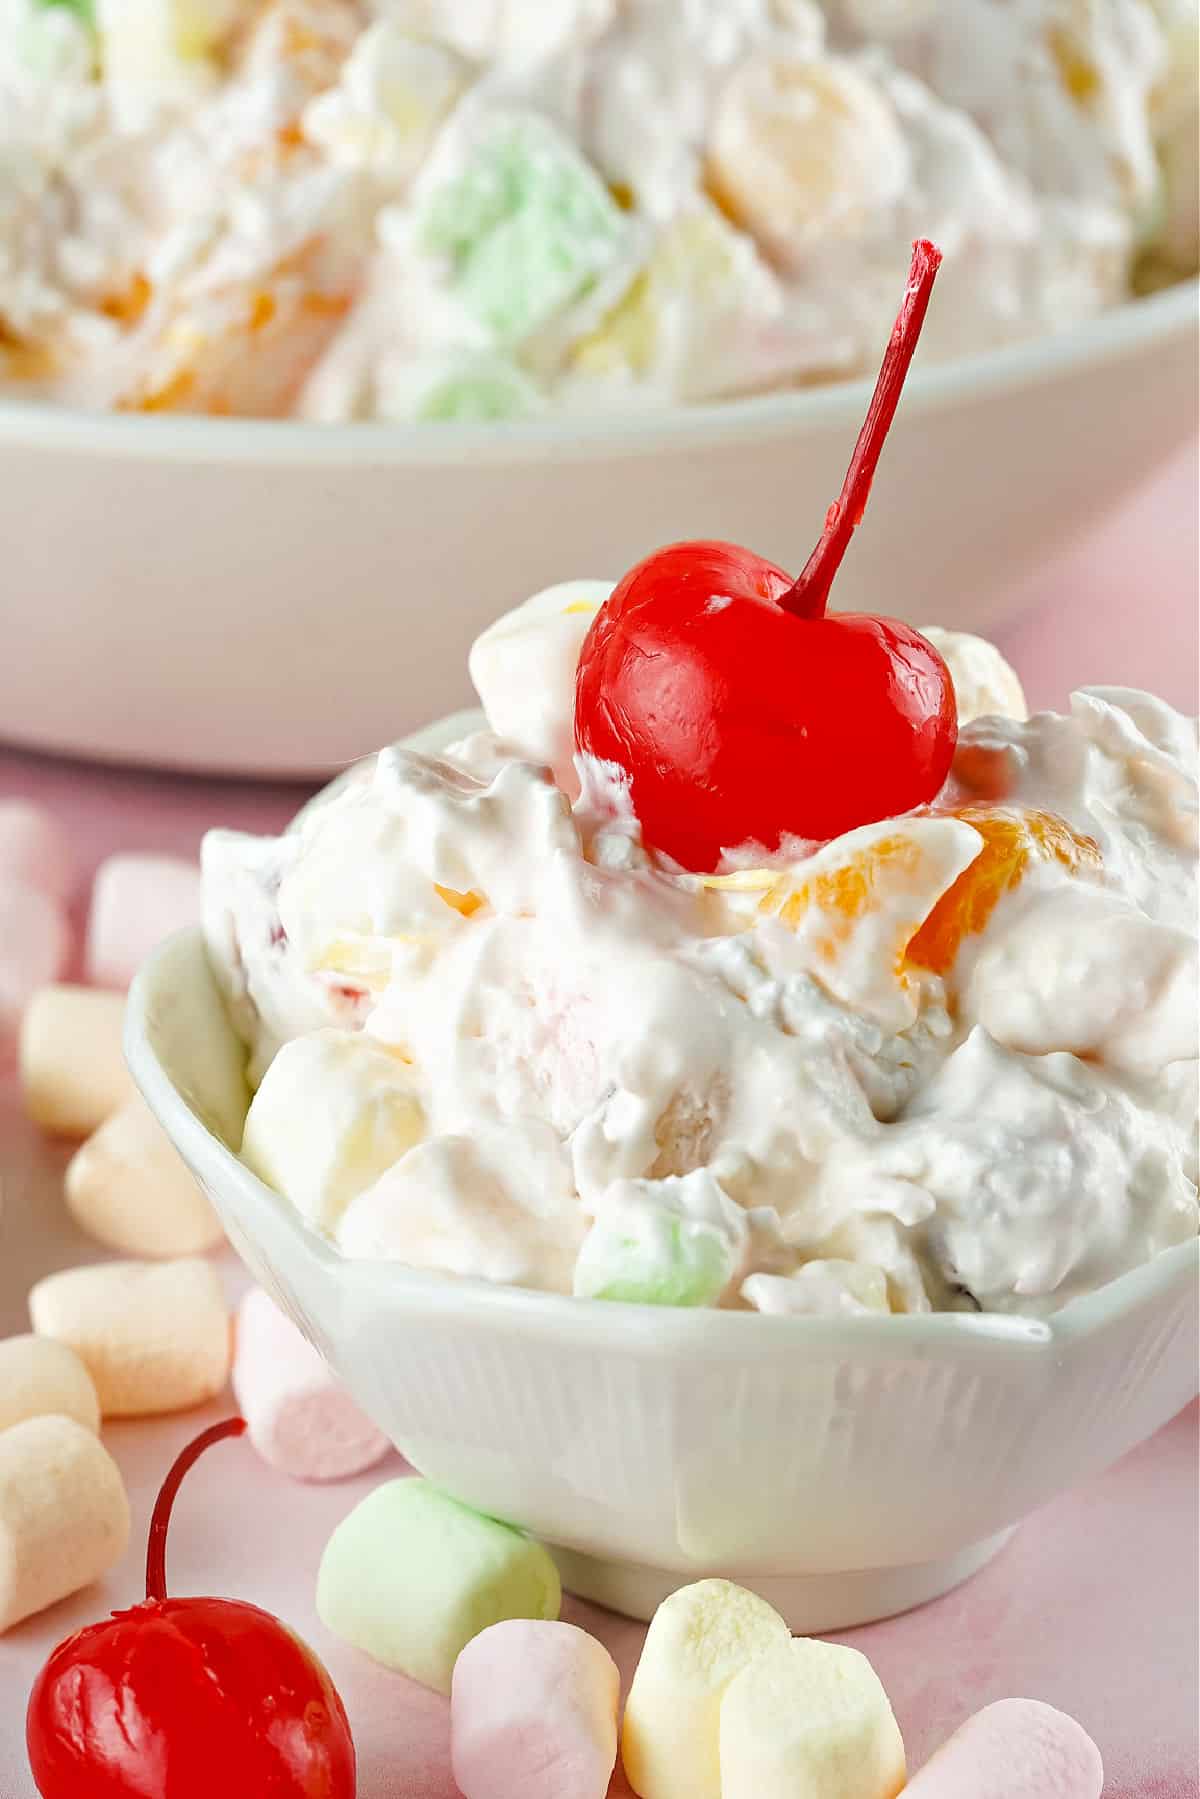 Ambrosia salad in a bowl topped with maraschino cherry.